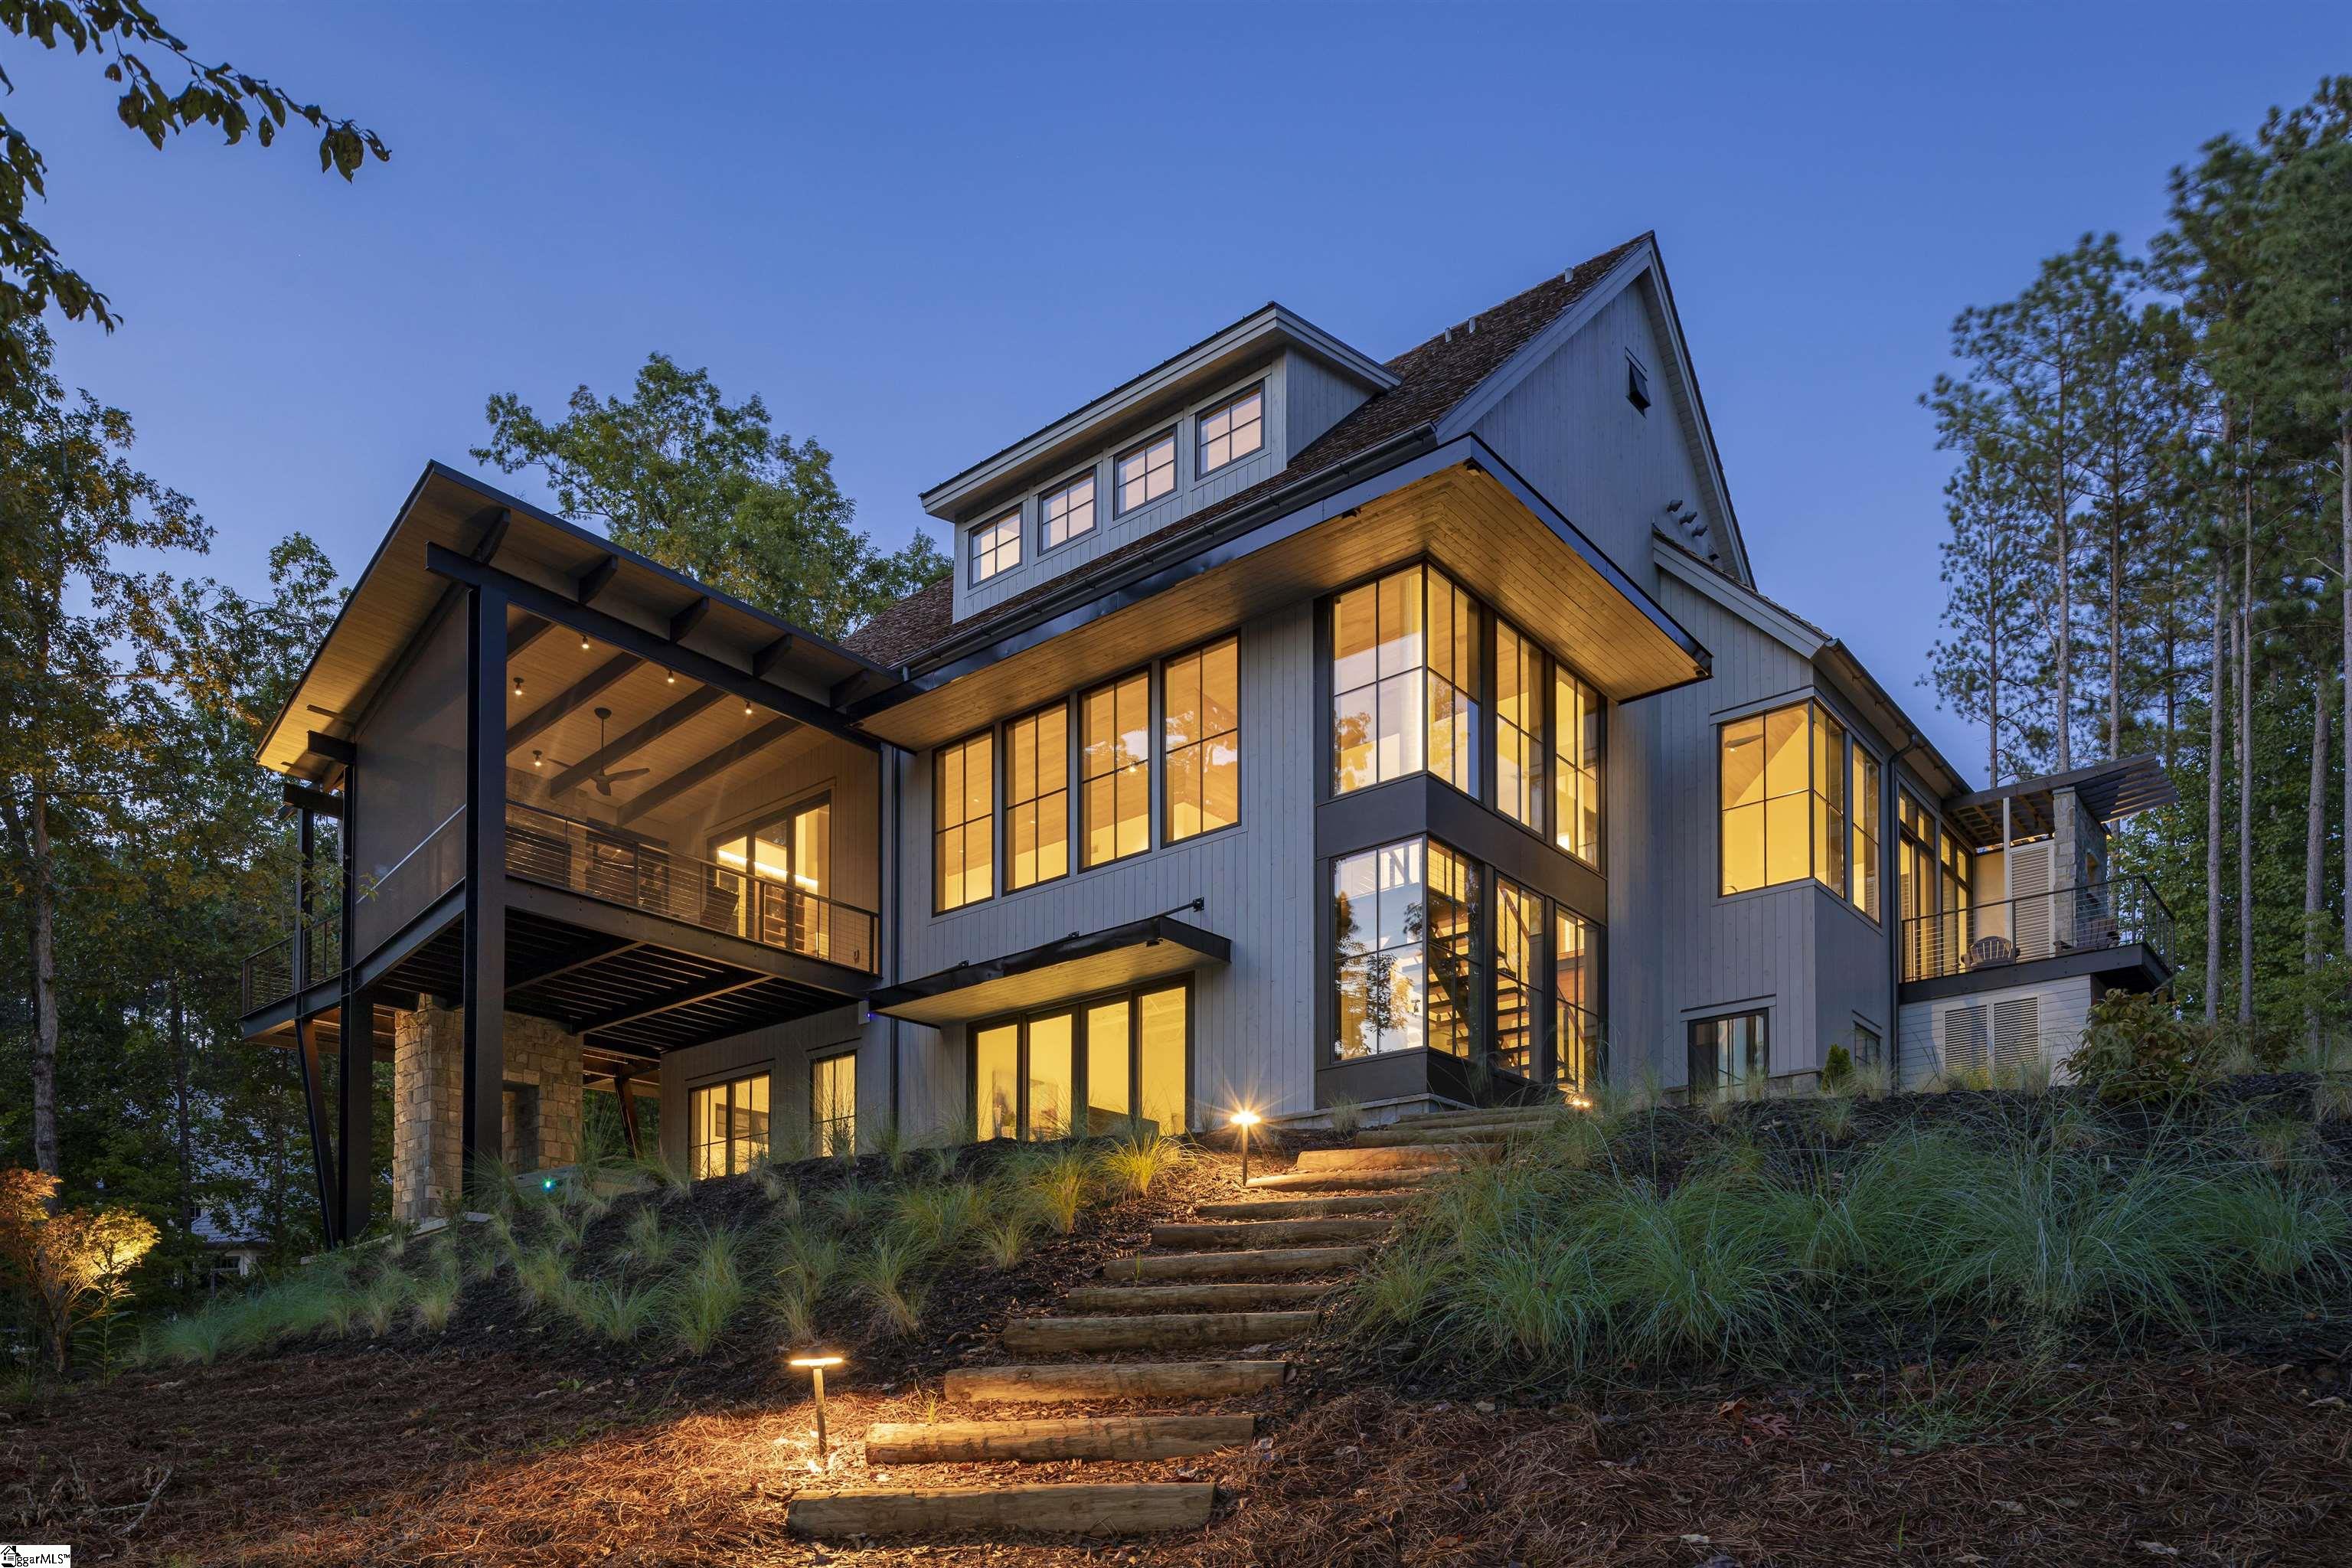 336 South Cove Road--The cover story home for "atHome" magazine's Fall 2020 builder edition is a stunning home that was thoughtfully designed by Johnston Design Group and proudly built by highly respected Ridgeline Construction Group in 2019. Located in The Reserve at Lake Keowee and nestled perfectly in a large enough cove for great views but small enough to paddleboard, kayak, or simply float and relax in peaceful bliss. This 5 bedroom, 5 1/2 bath house is the epitome of lake indoor/outdoor living and your outdoor living includes views of one of the most beautiful mountain lakes in the country, a private covered dock with boat lift and jet ski port, a Jack Nicklaus designed golf course, tennis, pickle ball, pool and country club! The main level merges indoor and outdoor spaces with views from the huge glass pivot front door right through to beautiful Lake Keowee. This level includes an open floor plan joining the kitchen, family room, bar, and even the screen porch via bi-folding doors that make separation of this space seamlessly disappear. On this level is the owner's suite with it's own outdoor shower and separate porch, walk-in closet, and free standing tub with corner lake views enabling "single story" living for the owner. The lake level includes an additional family room, wet bar with beverage fridge and ice maker, as well as an additional three bedrooms and three full baths. Two of the three bedrooms downstairs are en suites, and the third features built-in bunk beds with an adjacent bathroom. With ultimate convenience in mind, a second laundry room and mechanical/storage room with large freezer sits just off the family room. Sliding glass doors from the lake level family room provide access to an ironwood patio with an outdoor lounge that has panoramic lake views. To the right is an above ground spa that sits perfectly under the cover of the upper lever porch and is a fantastic nightly (or morning) relaxer. To the left, a gentle path leads you down to your private deep water dock. The fifth bedroom is a private guest suite above the three car garage and includes an en suite bath as well as a walk-in closet. A couple of favorite features of the home include a huge concrete gas fireplace with a retractable 85" TV (so it doesn't block the views when not in use) and the stunning corner wall of windows as you descend from the main level to the lower level, overlooking the lake. There's also an outdoor dining area on the porch providing the perfect venue for home cooked or chef catered dinners. Additionally, this home is situated at the end of a gently sloping cul-de-sac and has the rare combination of a flat driveway/gentle slope with a deep water dock site. Make your Lake Keowee dream come true...your friends and family will love you for it!